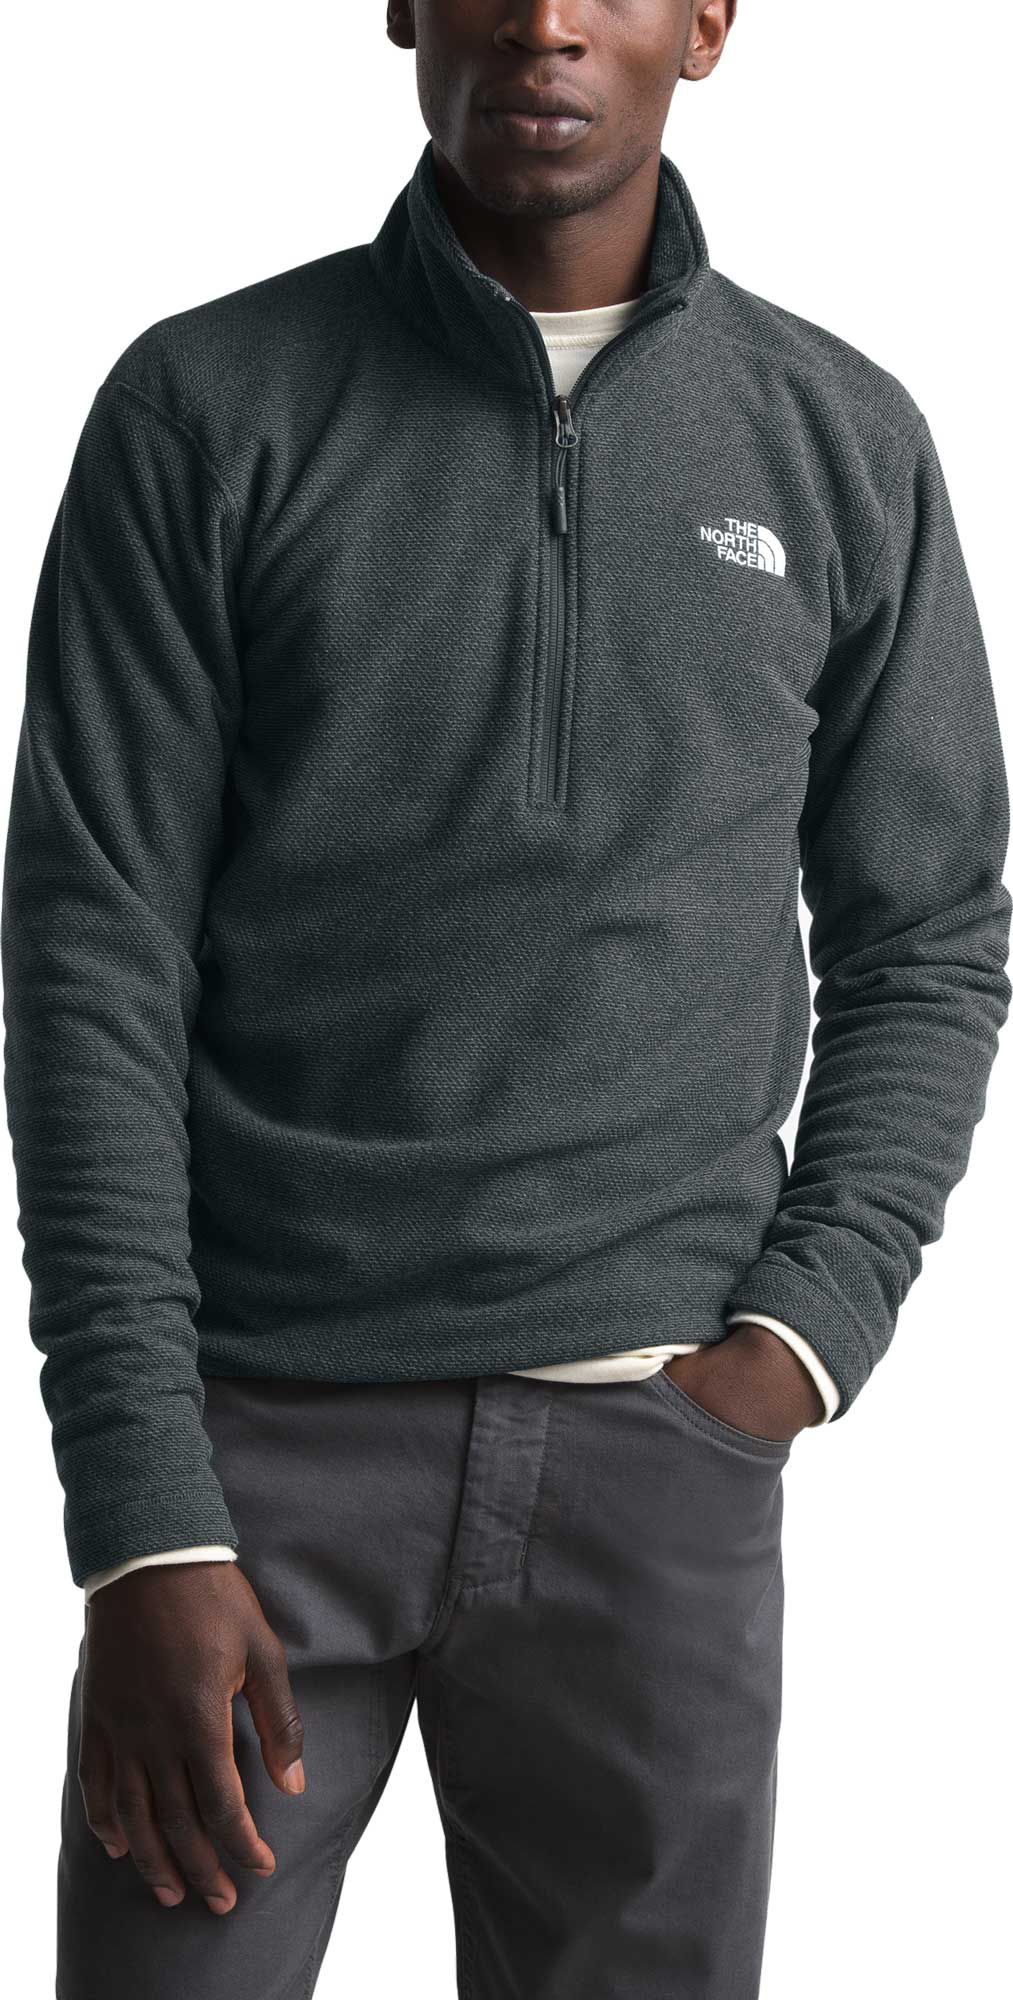 North Face Quarter Zip Pullover Top Sellers, UP TO 50% OFF | www 